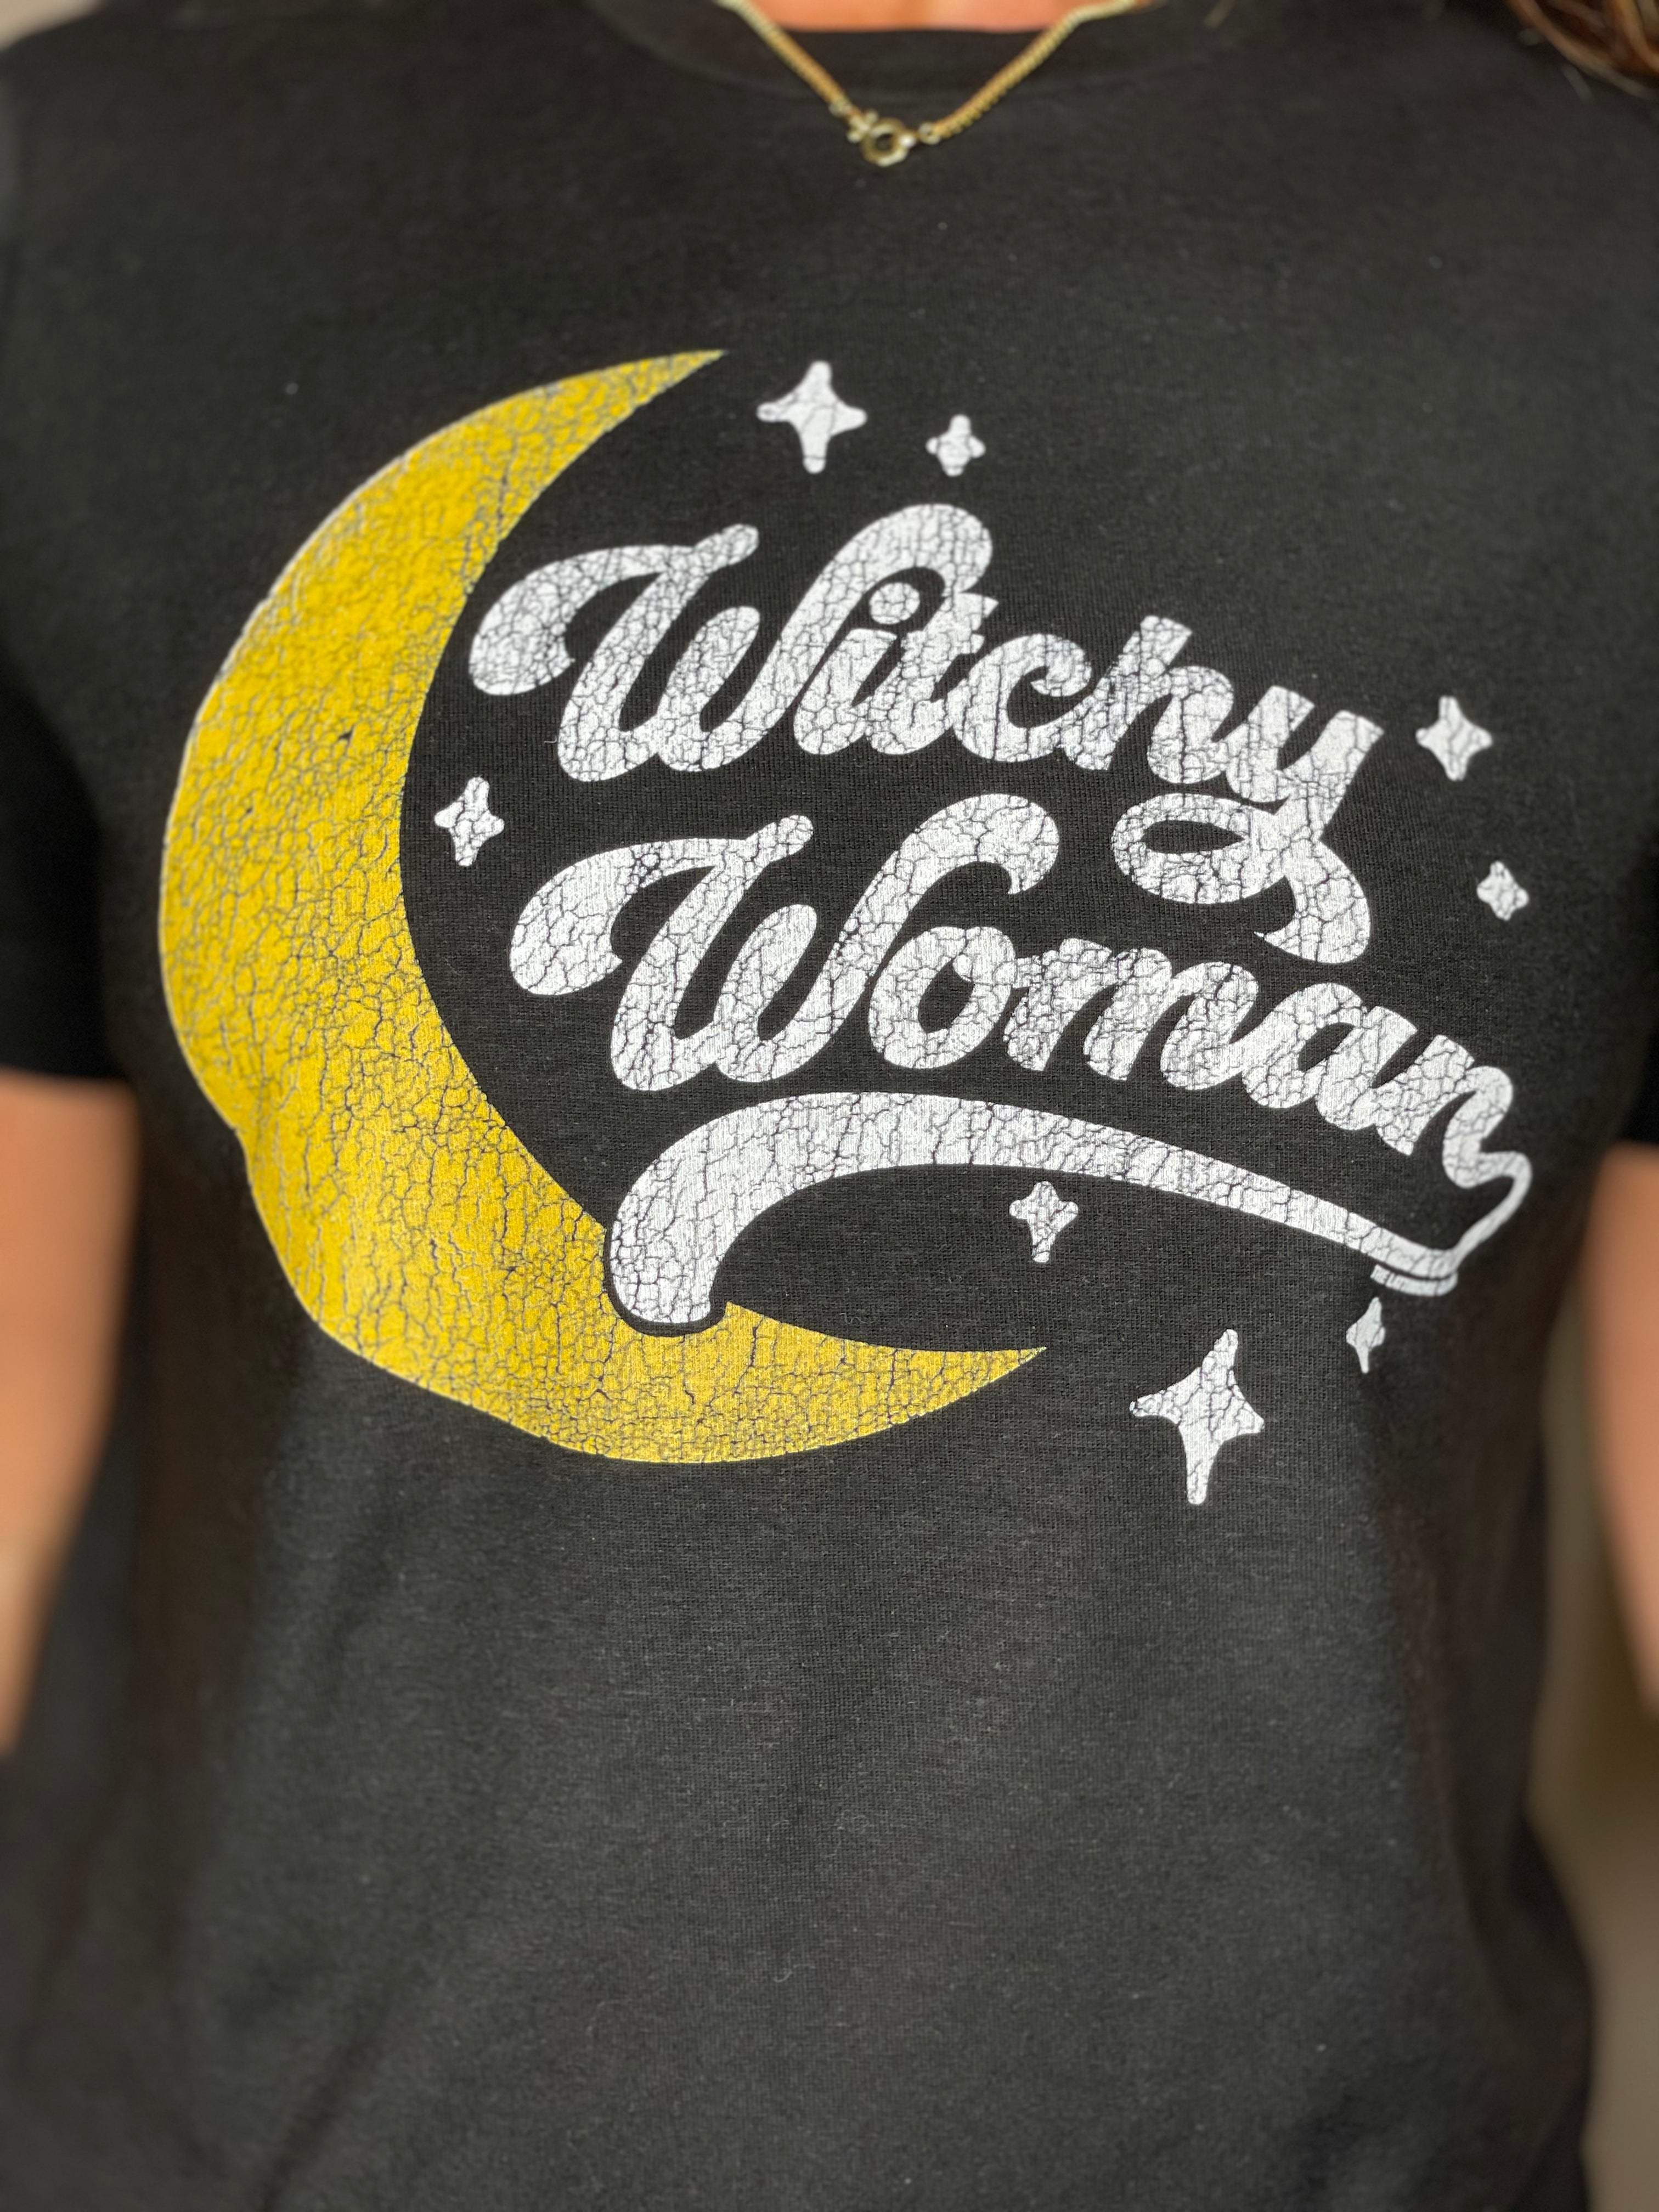 Witchy Woman Tee.